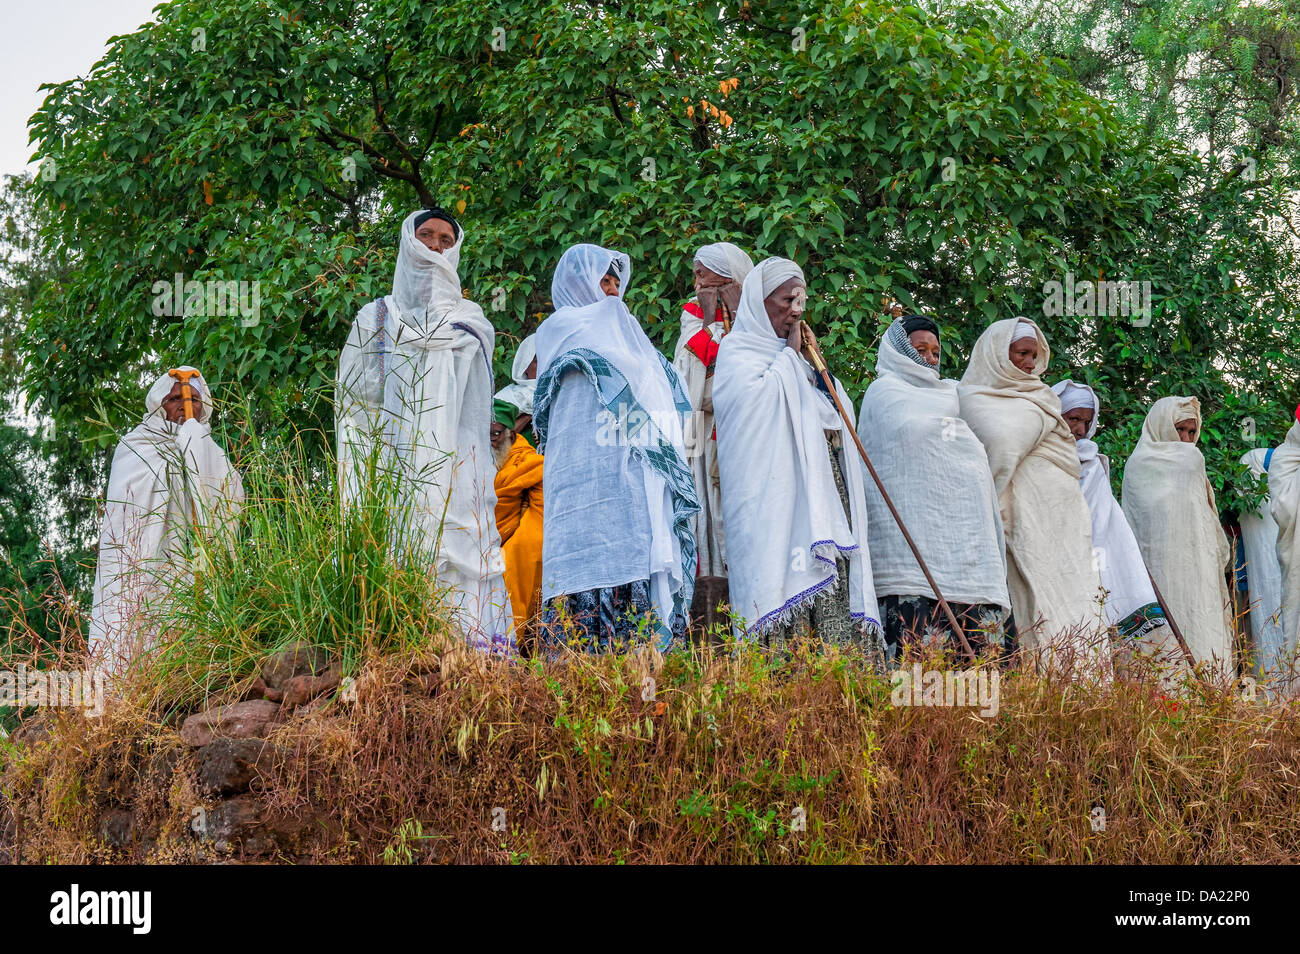 Pilgrims with the traditional white shawl attending a ceremony at the Bete Medhane Alem Church, Lalibela, Ethiopia Stock Photo